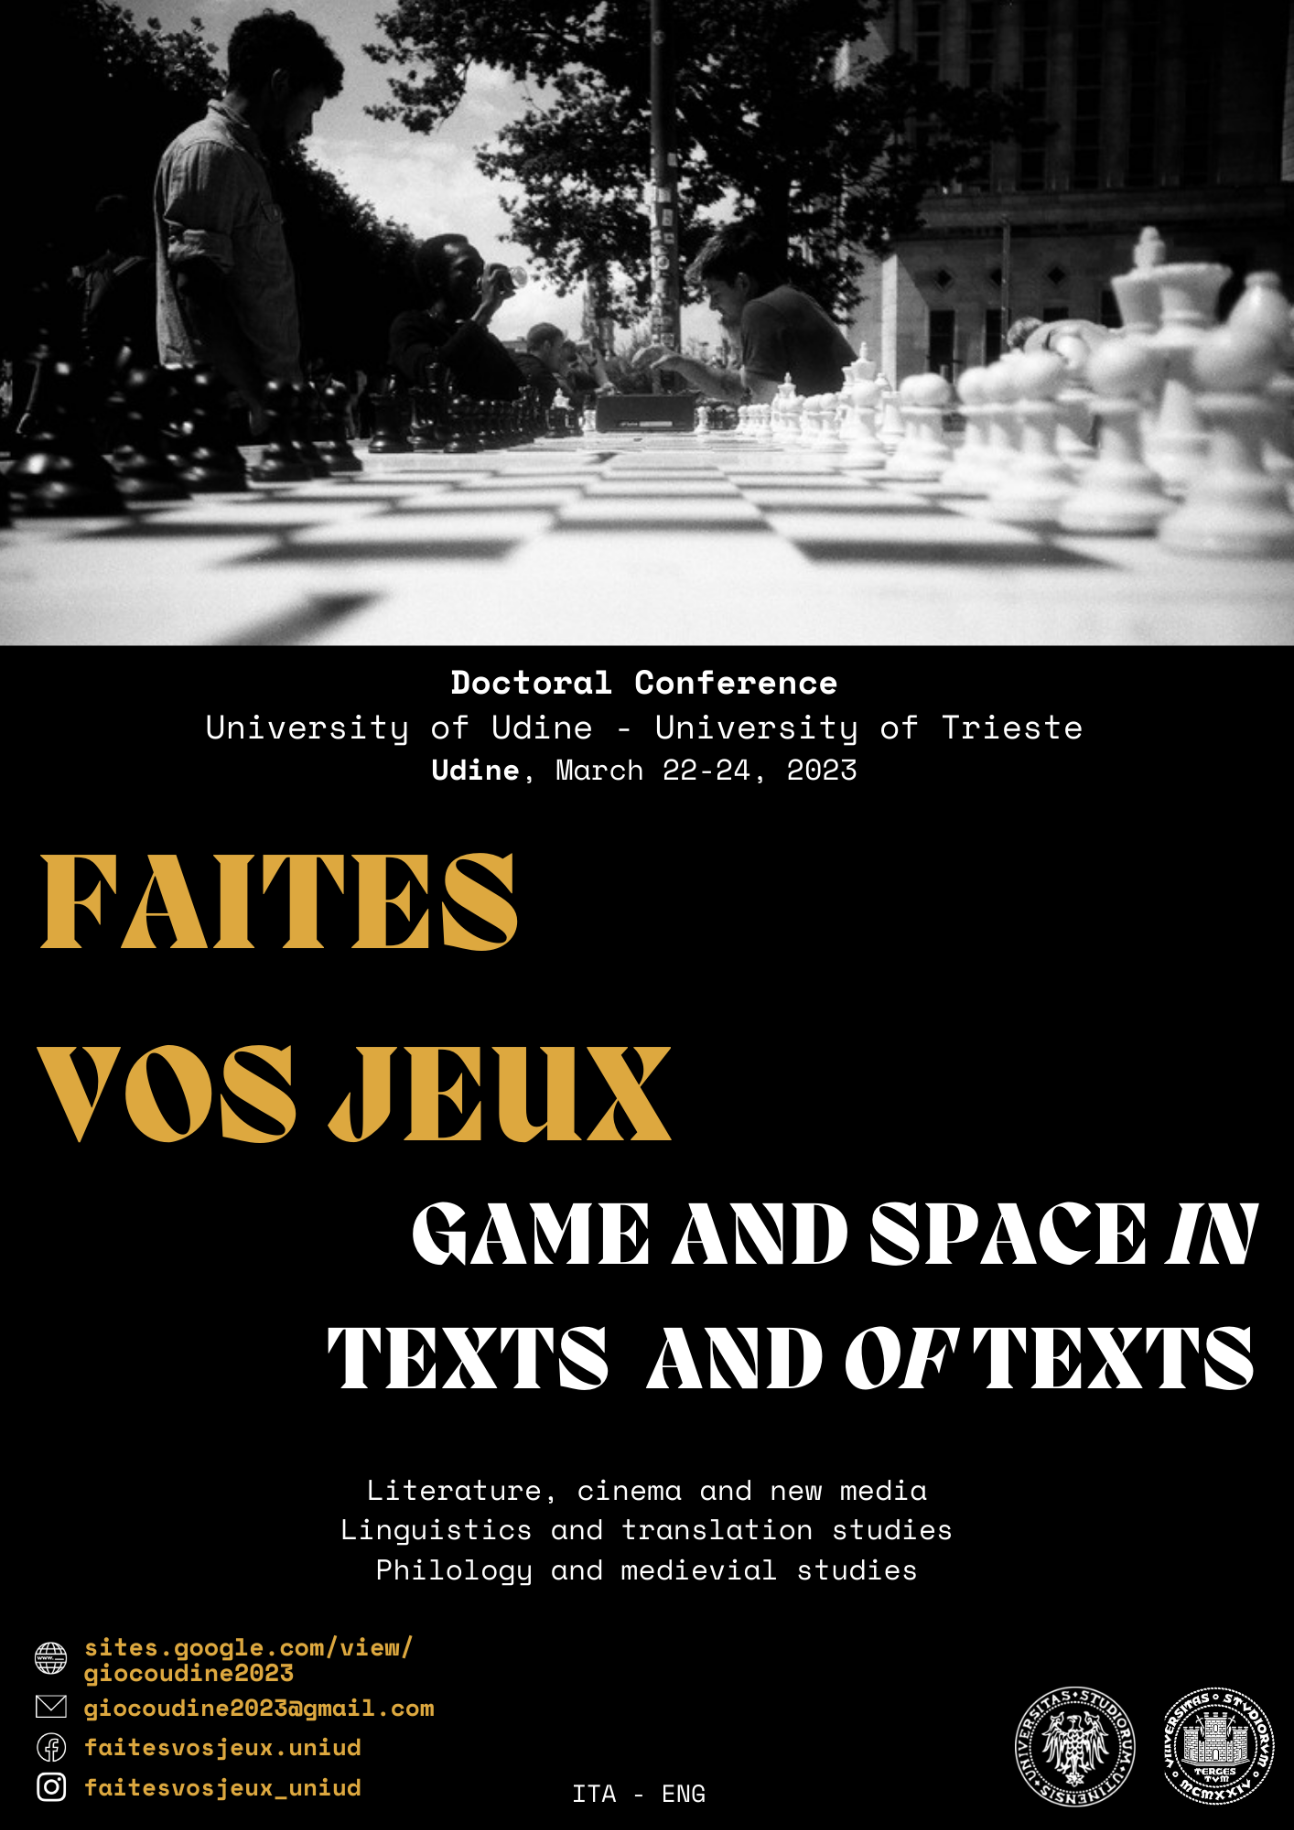 Faites vos jeux: game and space in texts and of texts (Udine, Italie)